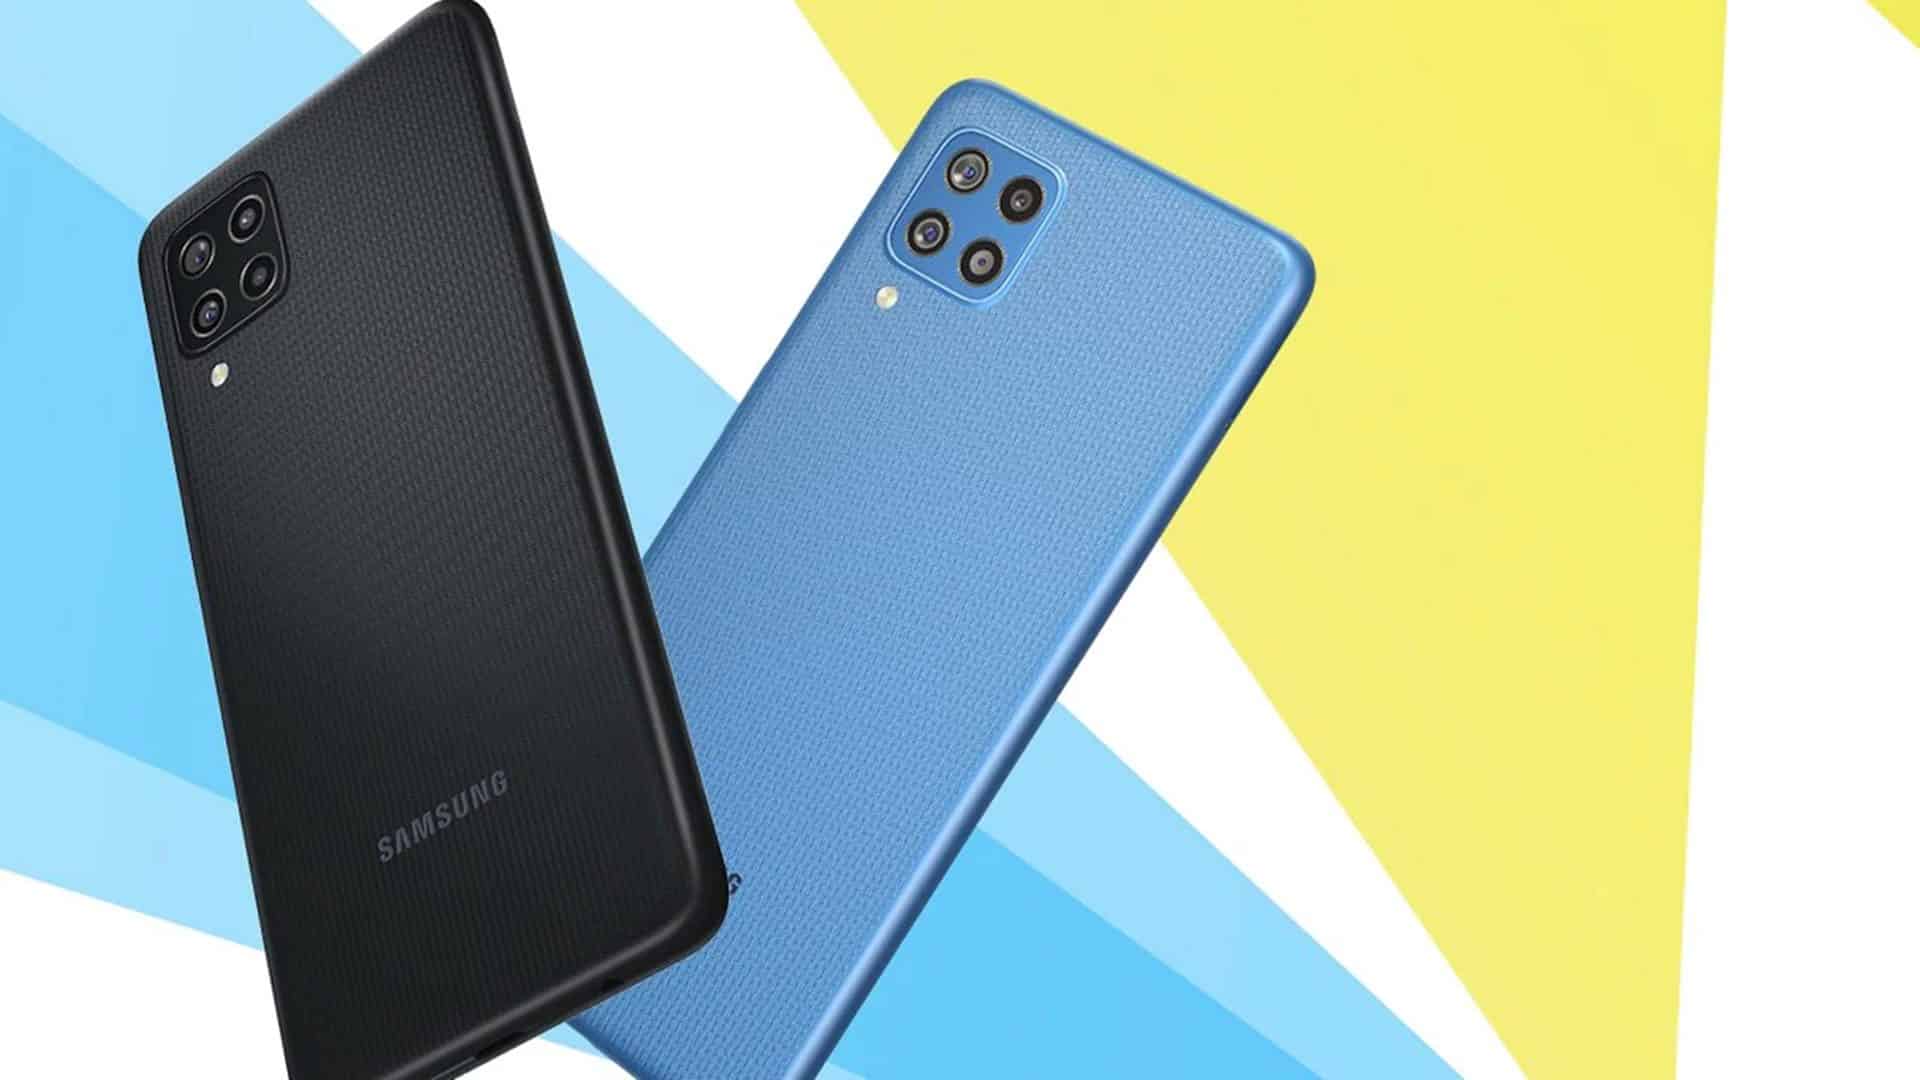 Samsung Galaxy F22 budget smartphone launched in India; Price and Specifications